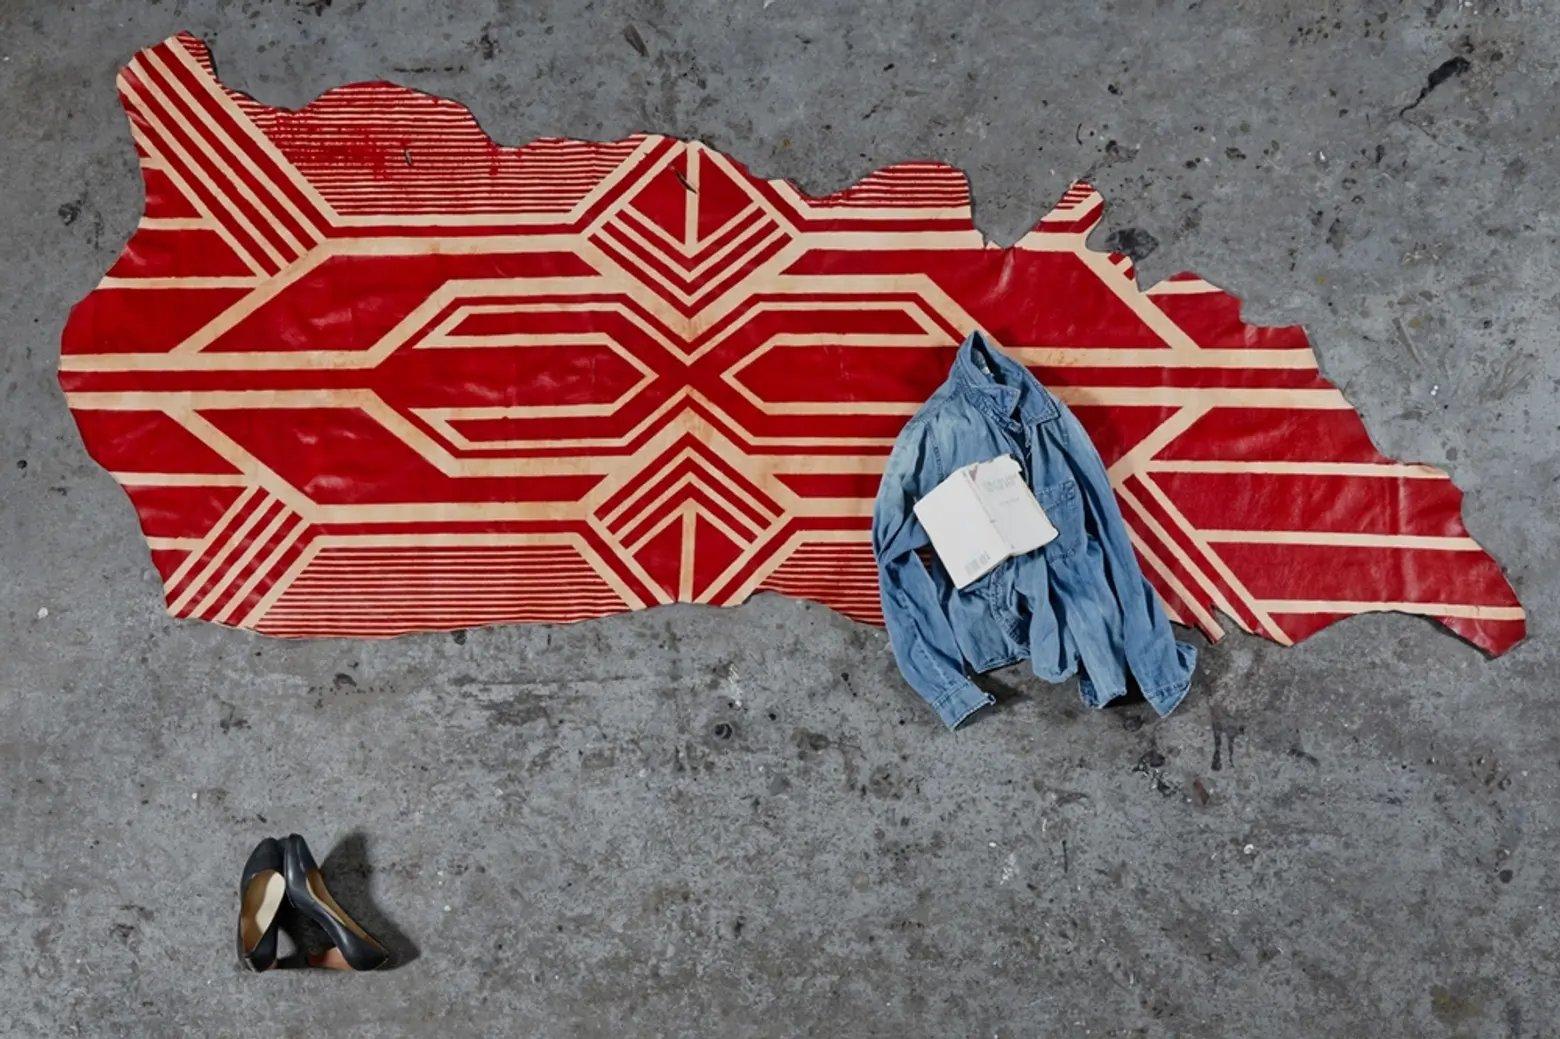 Brighten Up Your Floors With AVO’s Bold Graphic Rugs